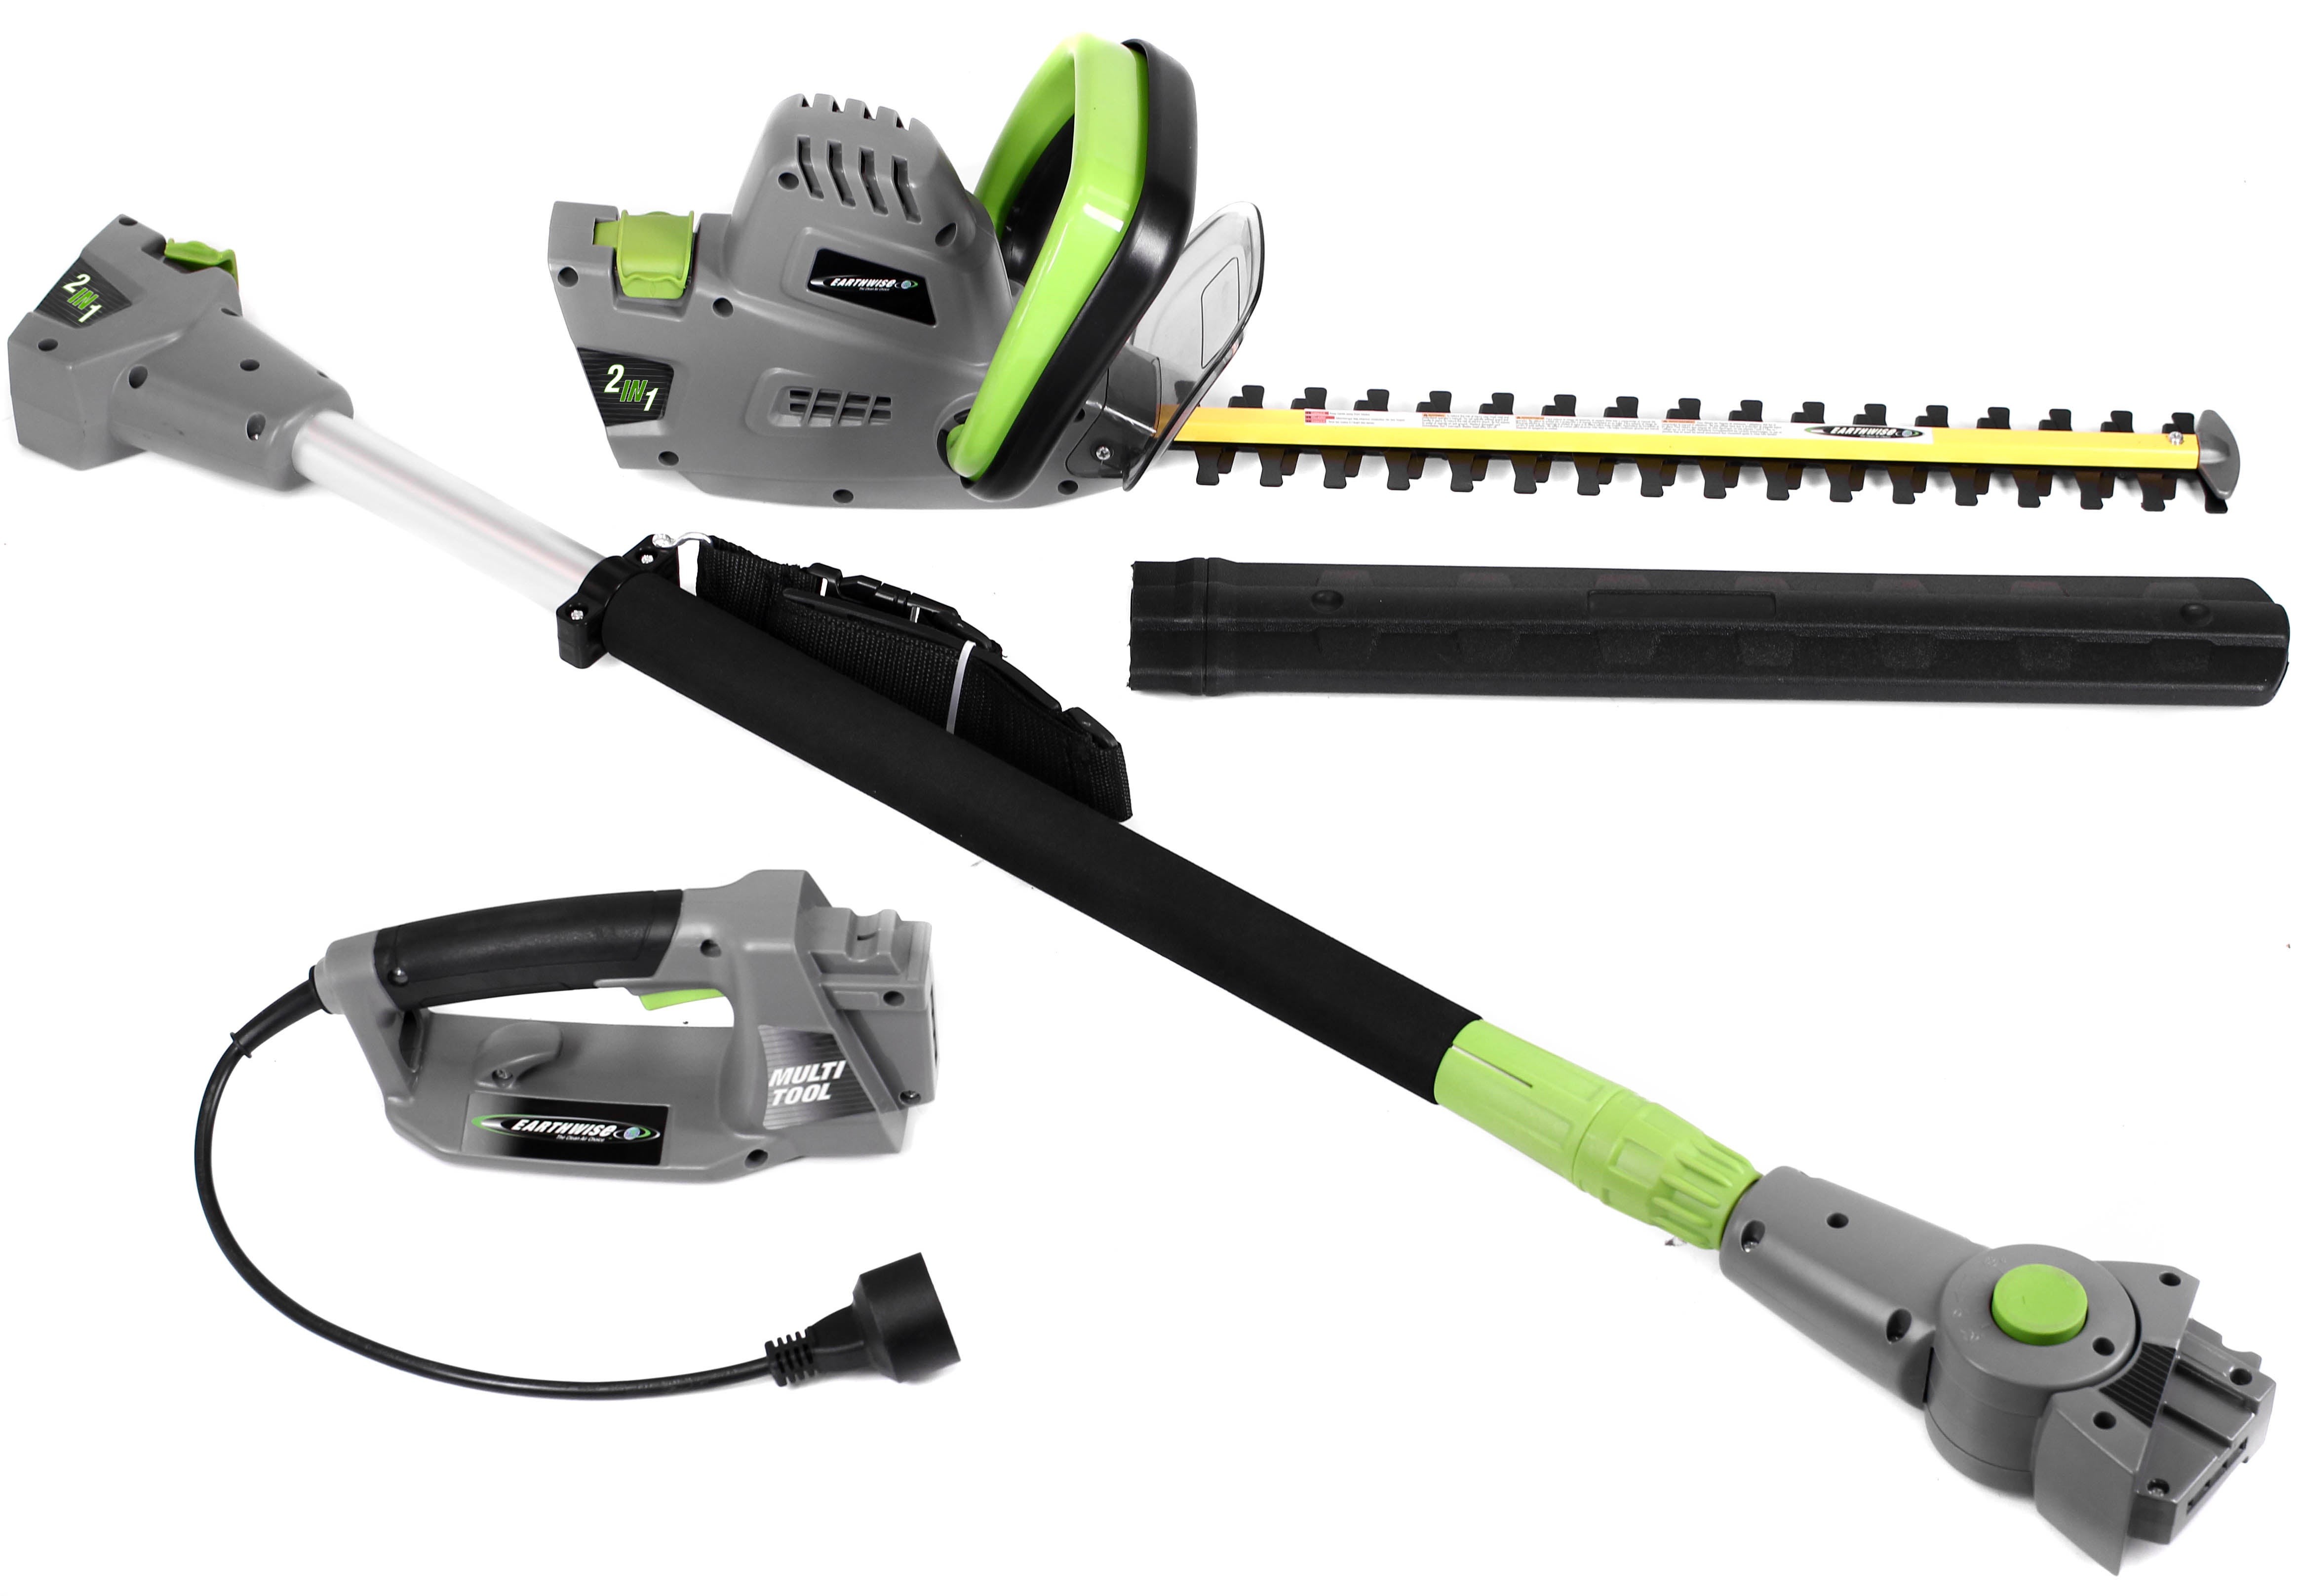 2-in-1 Convertible Pole Hedge Trimmer